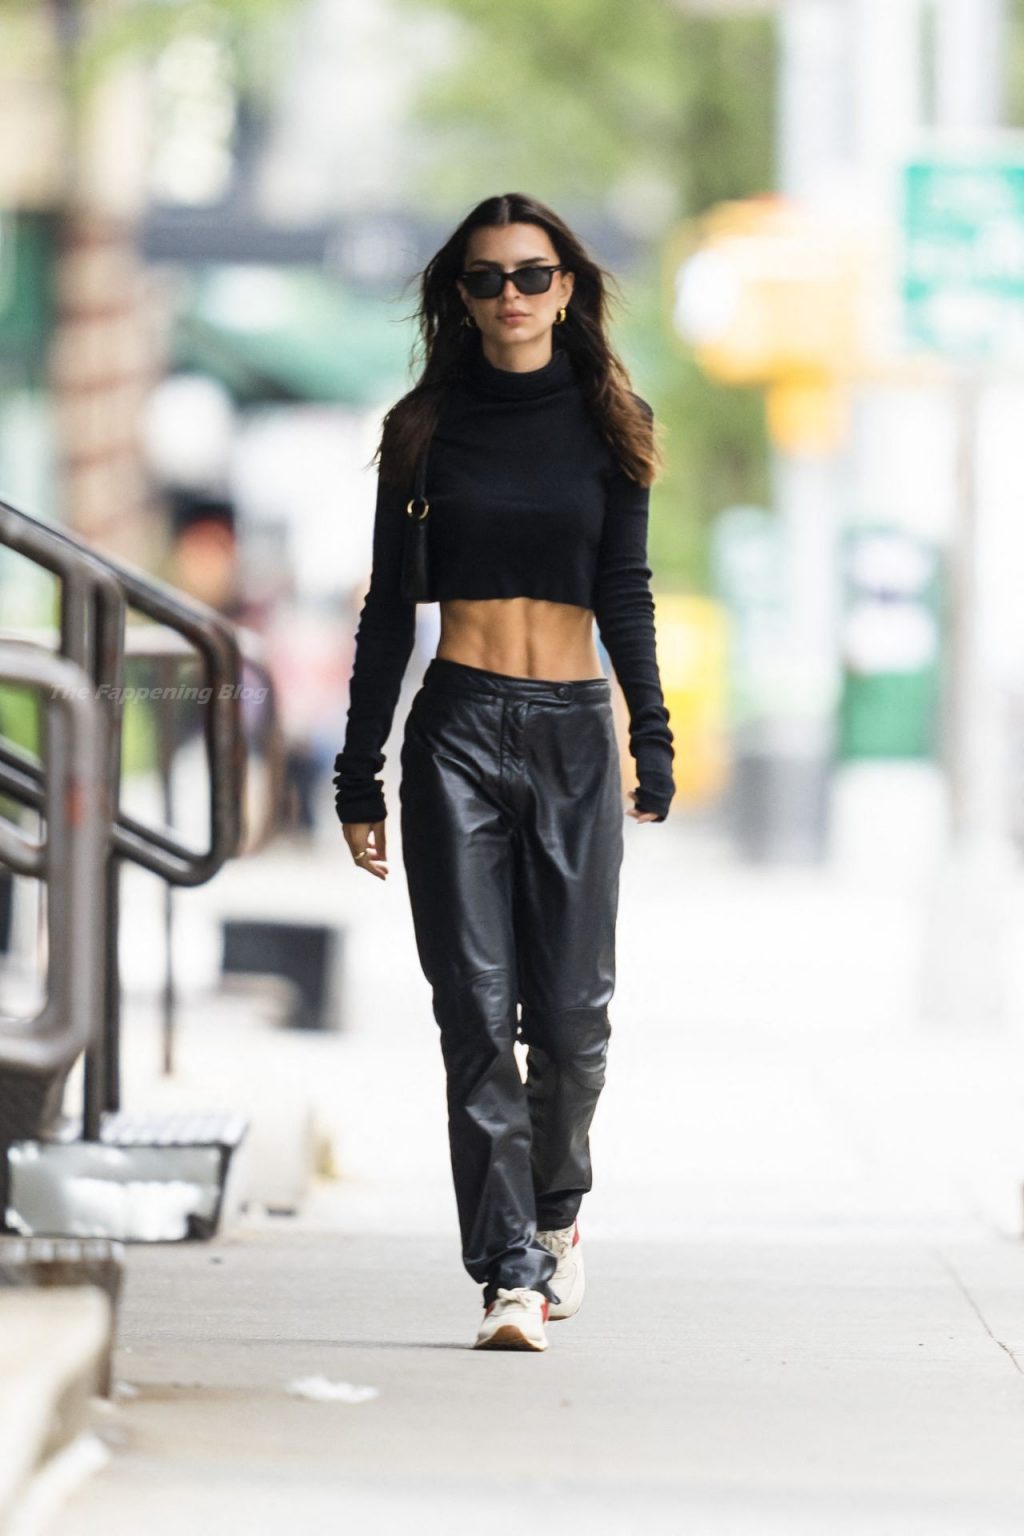 Emily Ratajkowski Shows Off Her Toned Abs While Out For A Stroll In NYC (48 Photos)